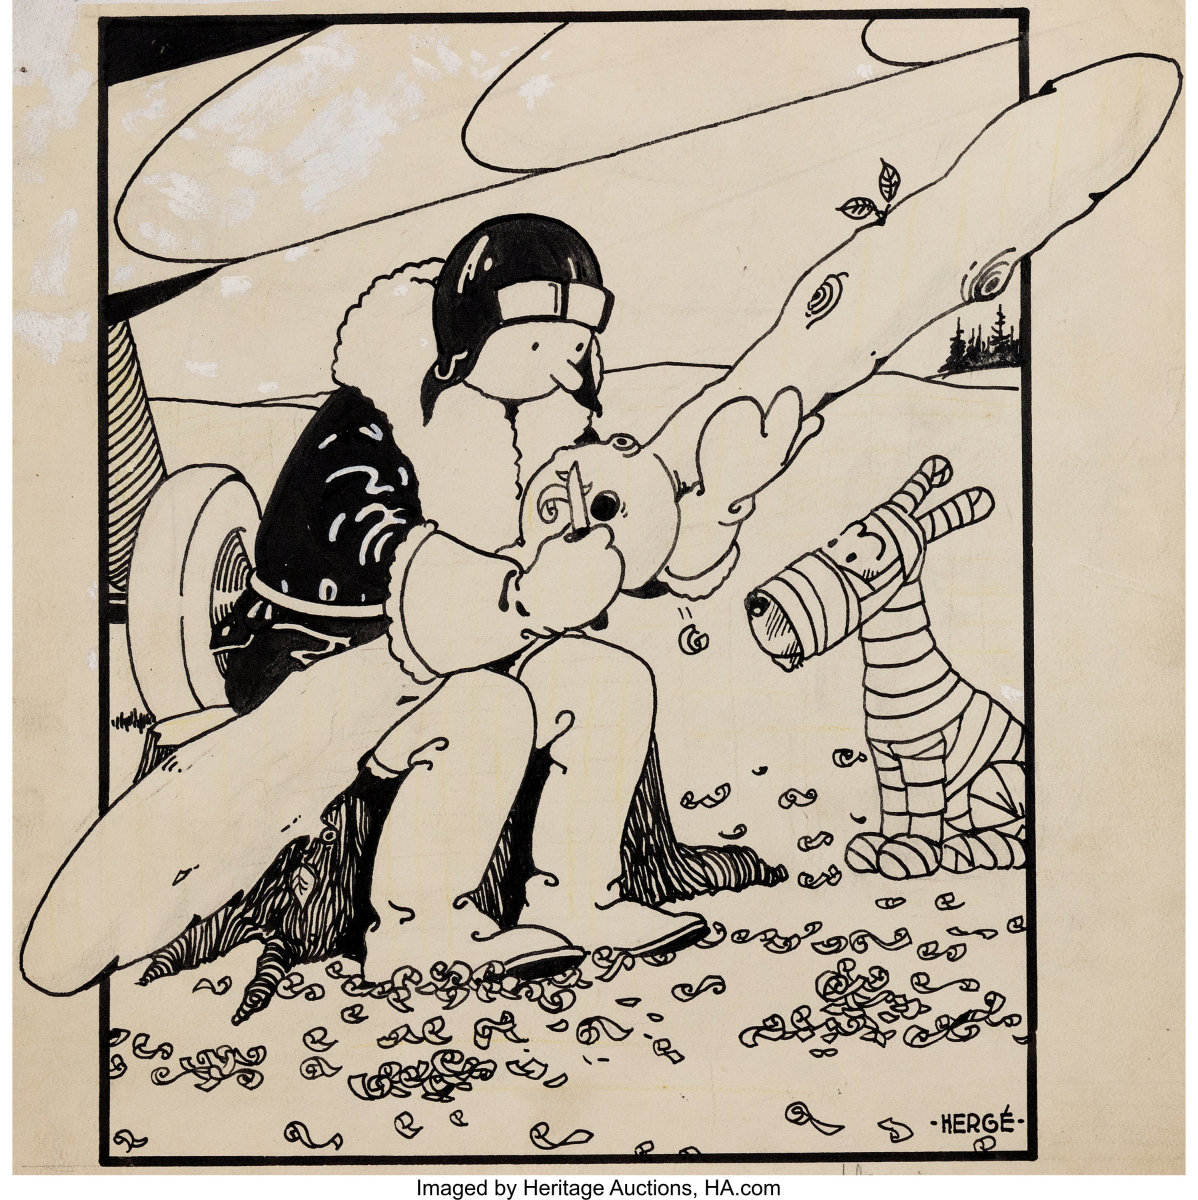 The very first published Tintin cover ever offered at auction: The Adventures of Tintin Vol. 1: Tintin in the Land of the Soviets, by Hergé (1907-1983). This original cover art, ink on paper, which sold for $1.1 million, is one of the notable lots that sold at Heritage Auctions in 2019. Hergé, whose real name is George Remi, is considered the star of European comics and his success is global.